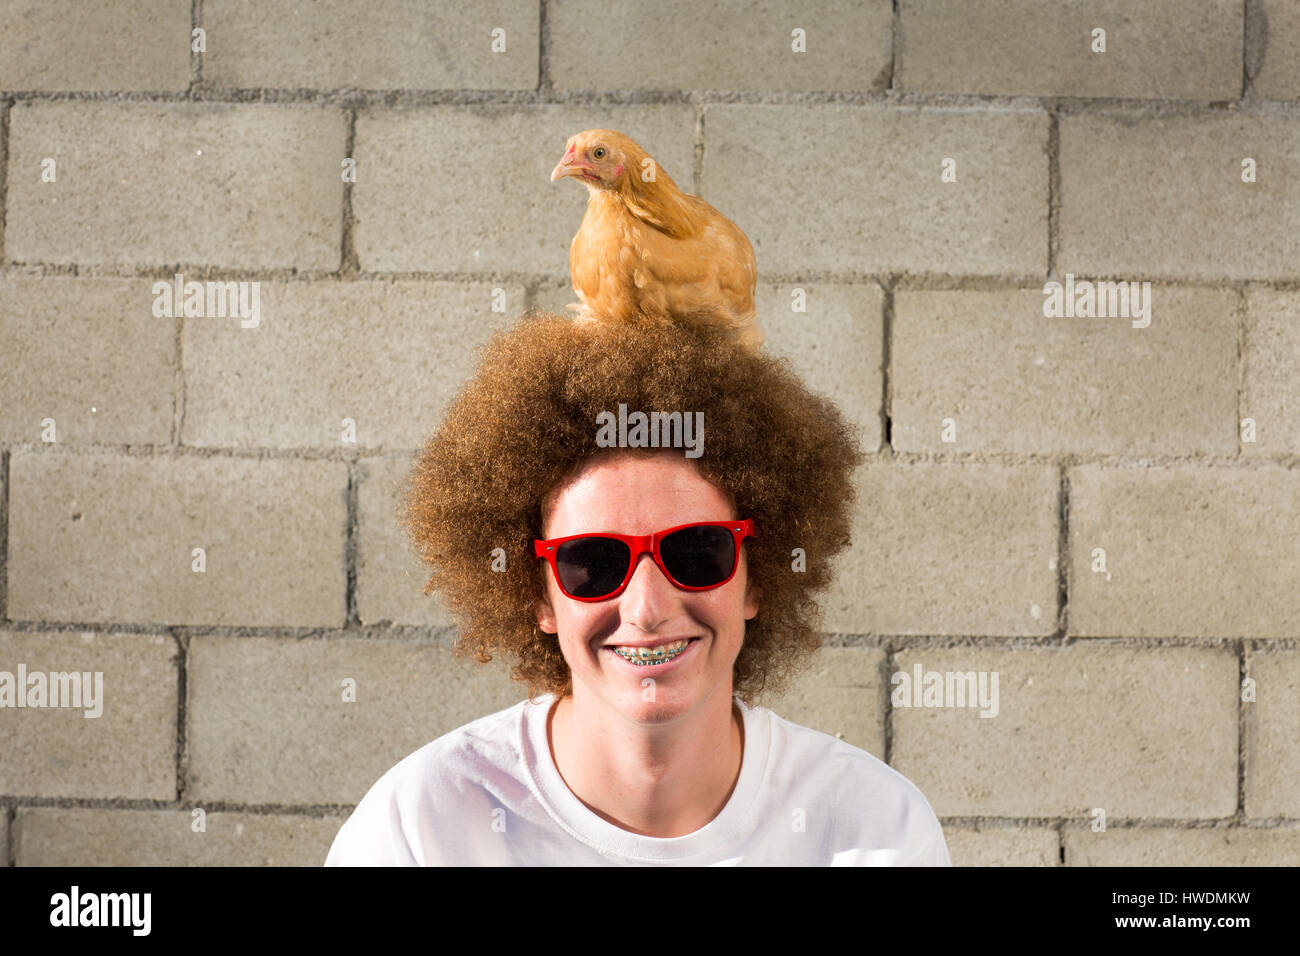 Portrait of teenage boy with red afro hair, chicken sitting on head Stock Photo